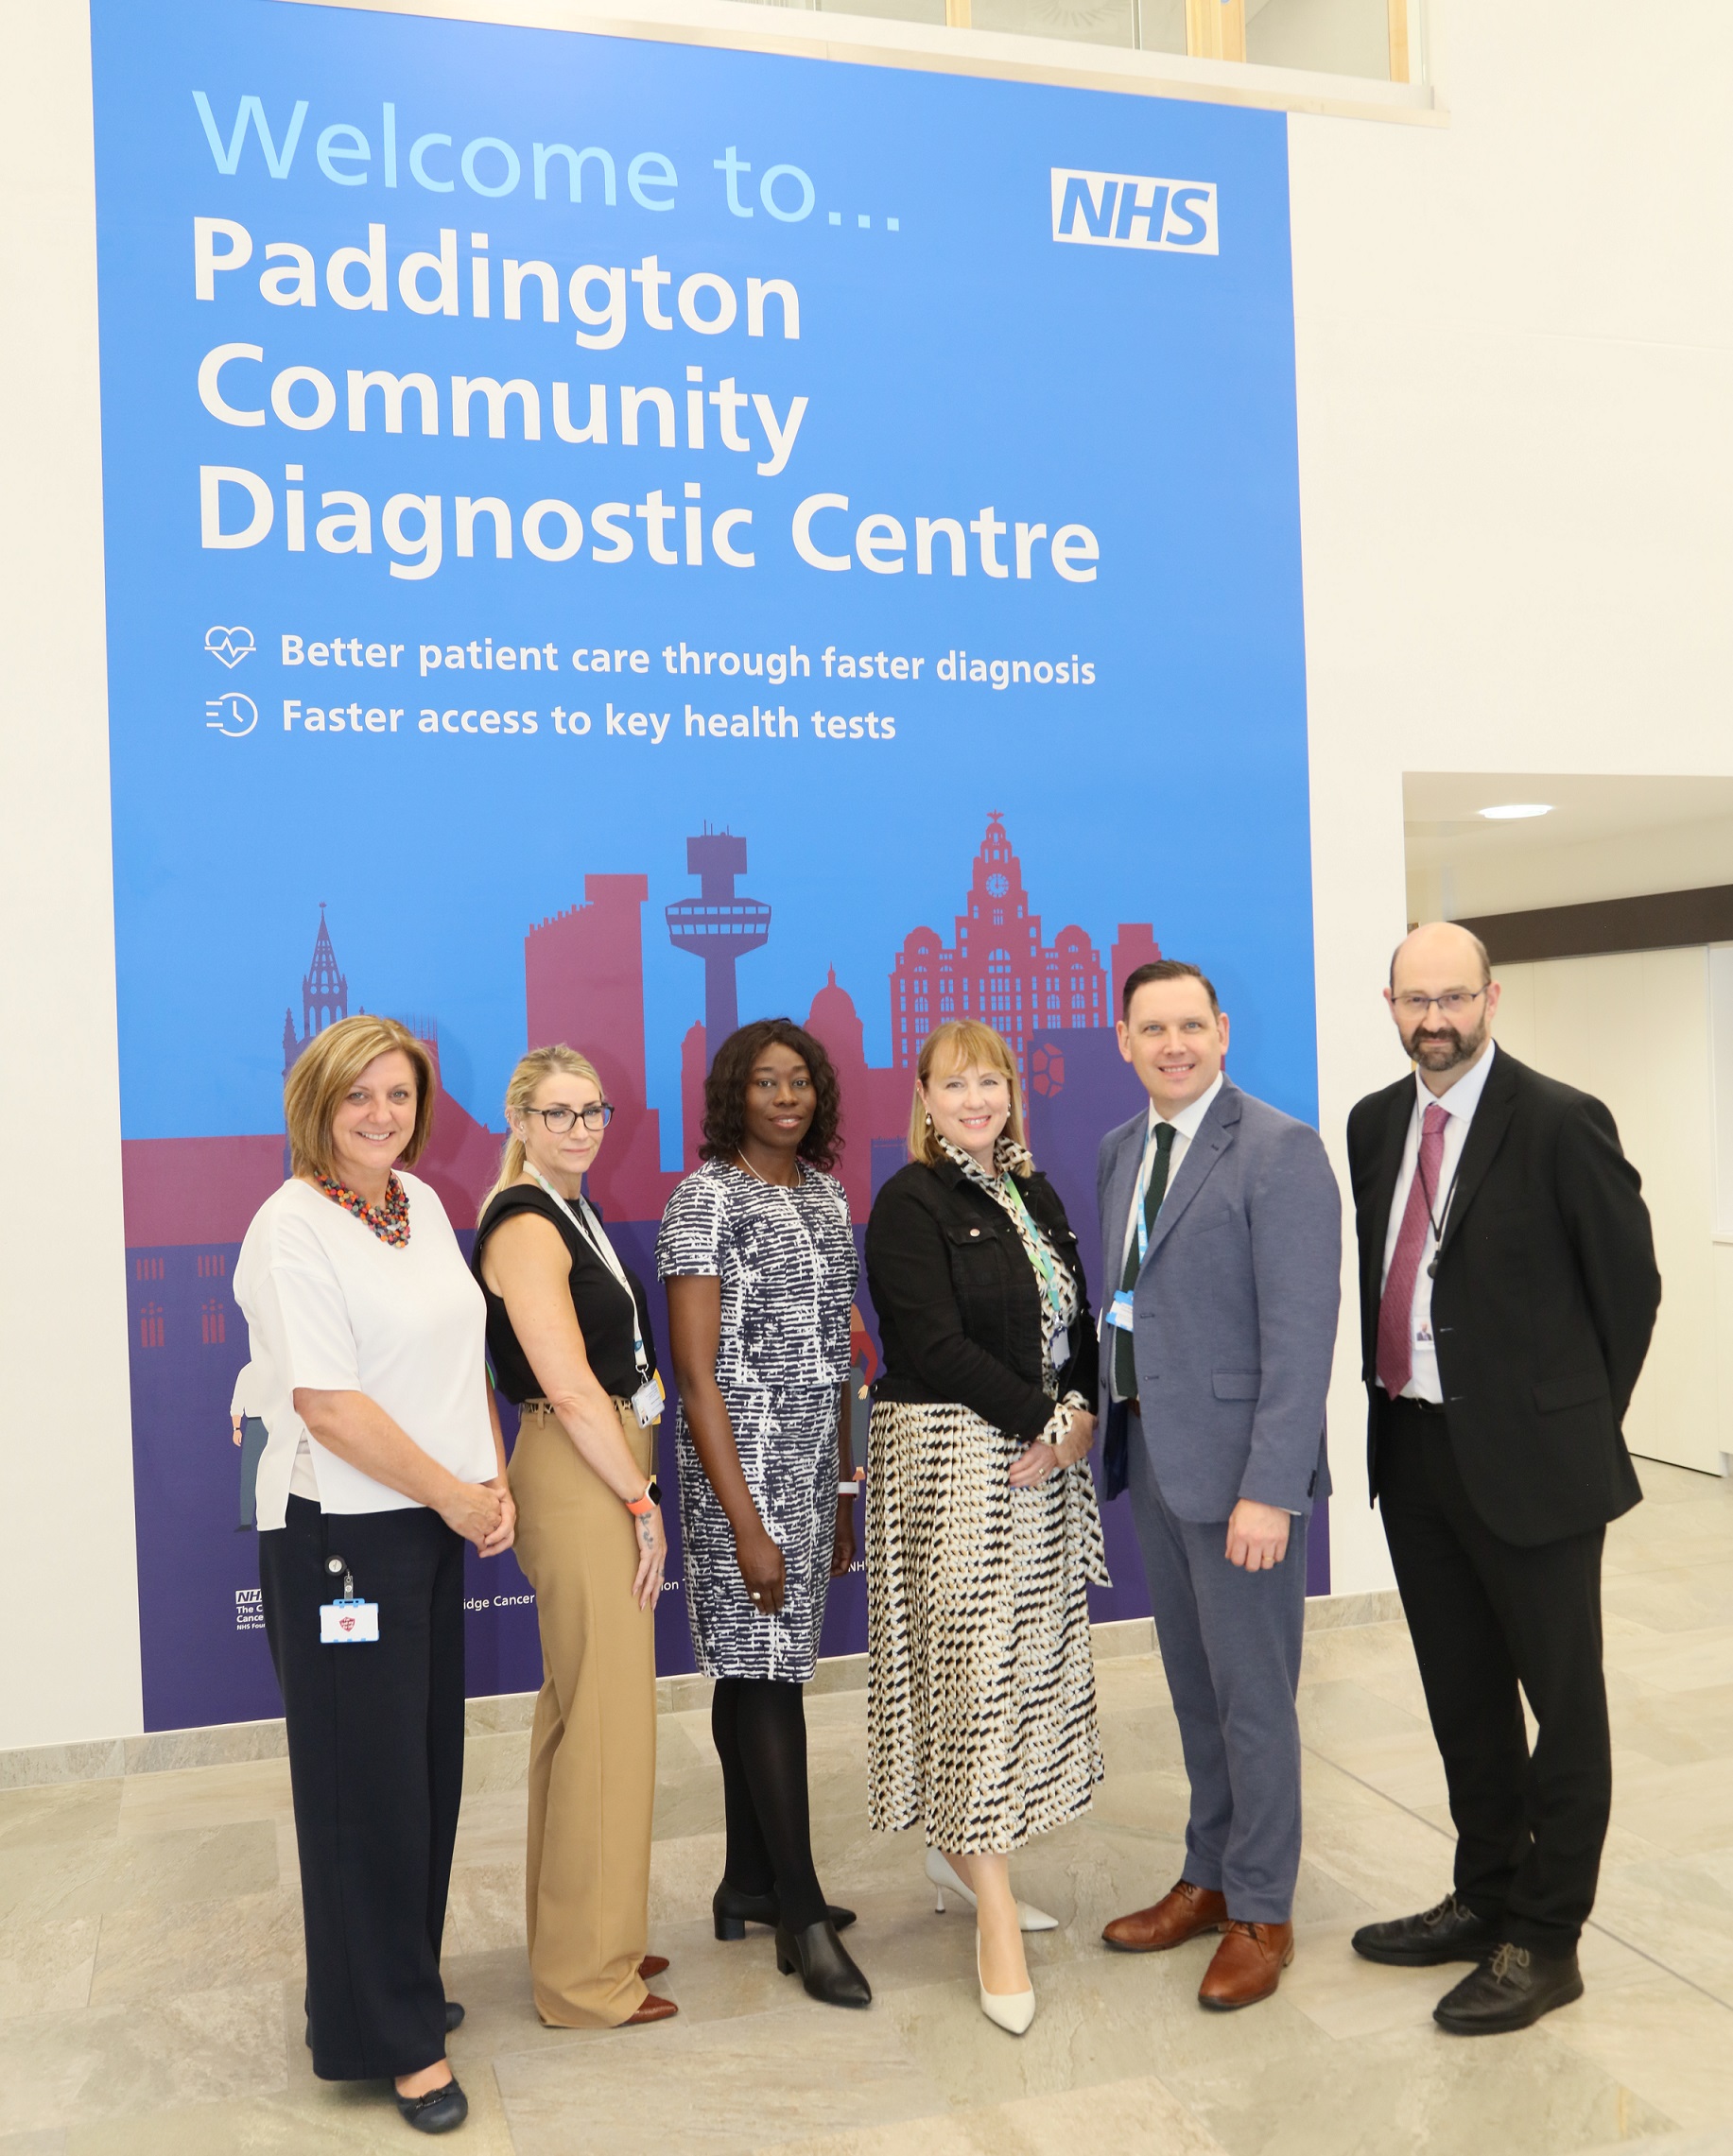 Picture of Chief Executive Liz Bishop with invited guests at the opening. They are pictured in front of a large graphic on the wall that says Paddington Community Diagnostic Centre and has artwork featuring landmark buildings across Liverpool and some people